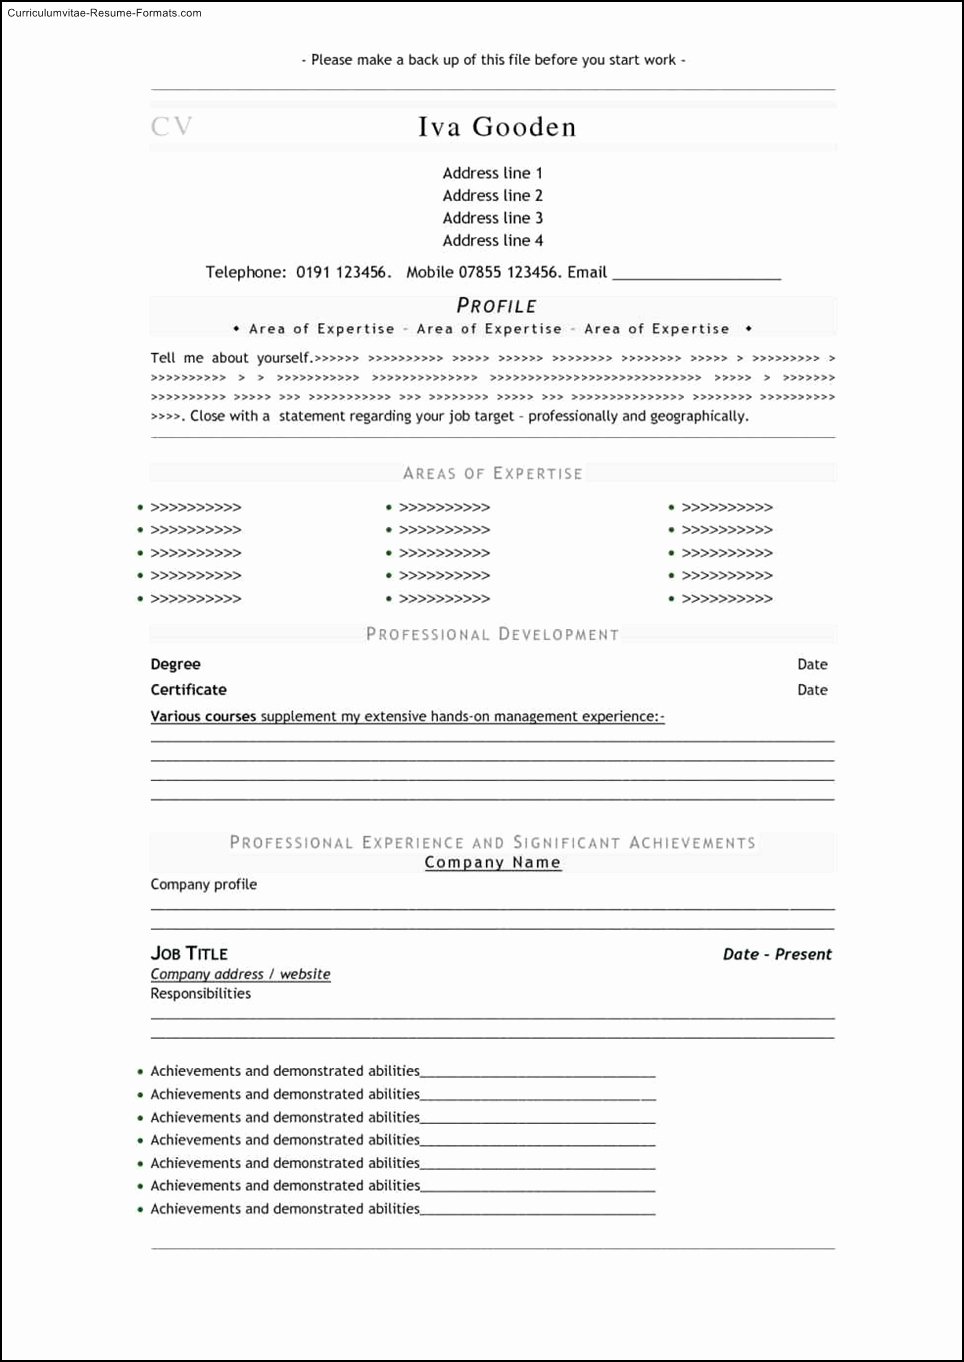 Download Free Professional Resume Templates Free Samples